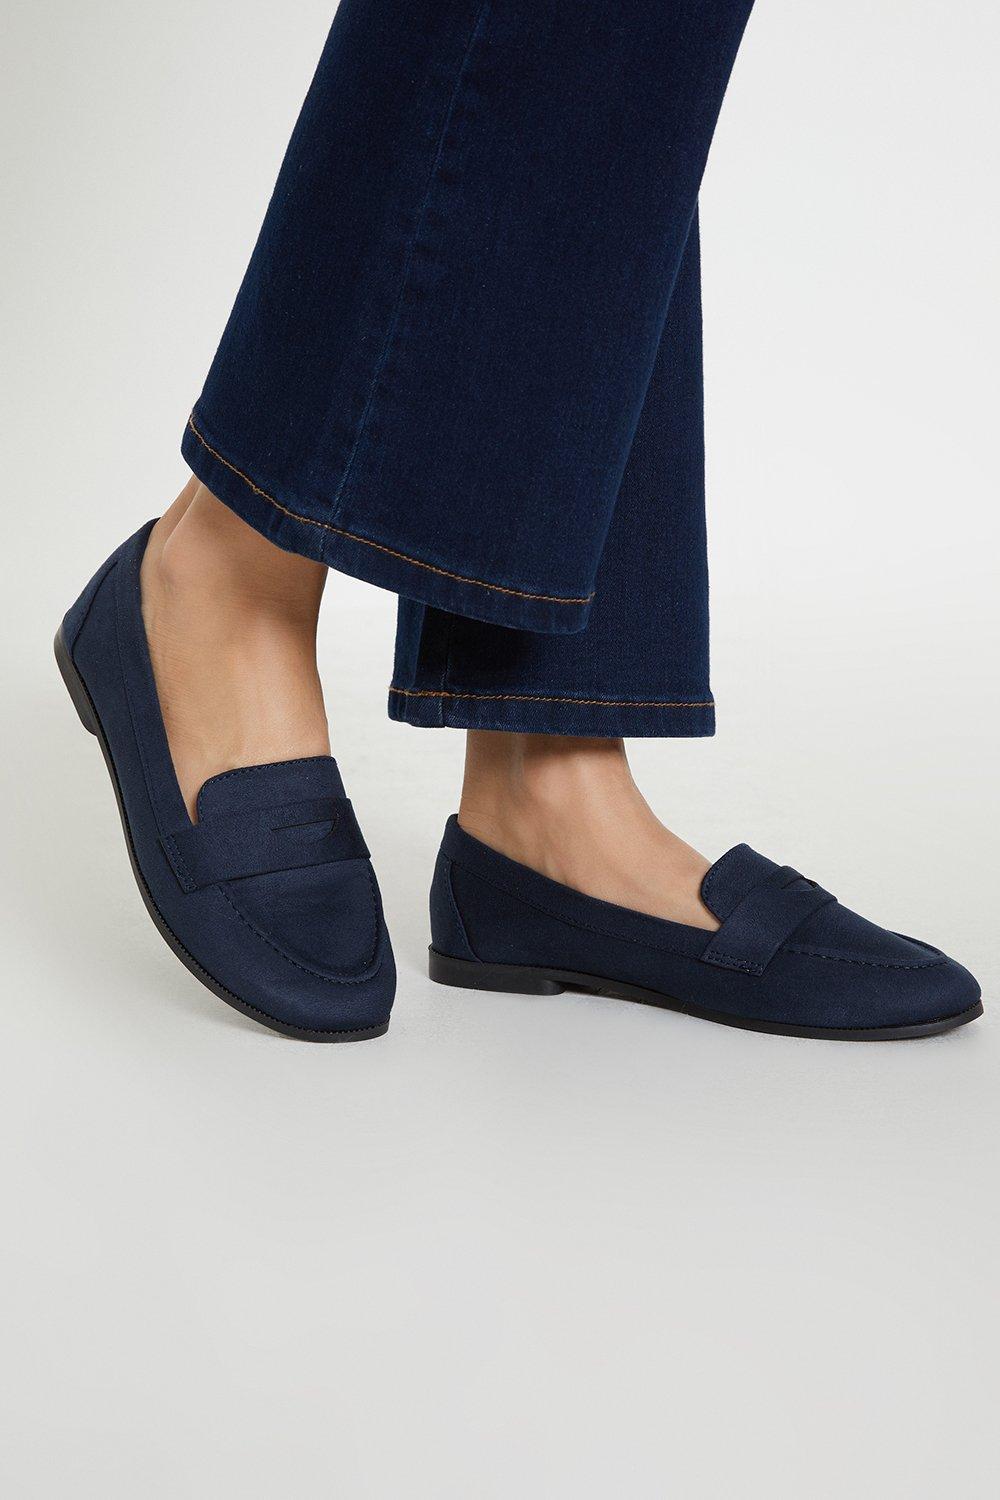 Women’s Wide Fit Lana Penny Loafers - navy - 6